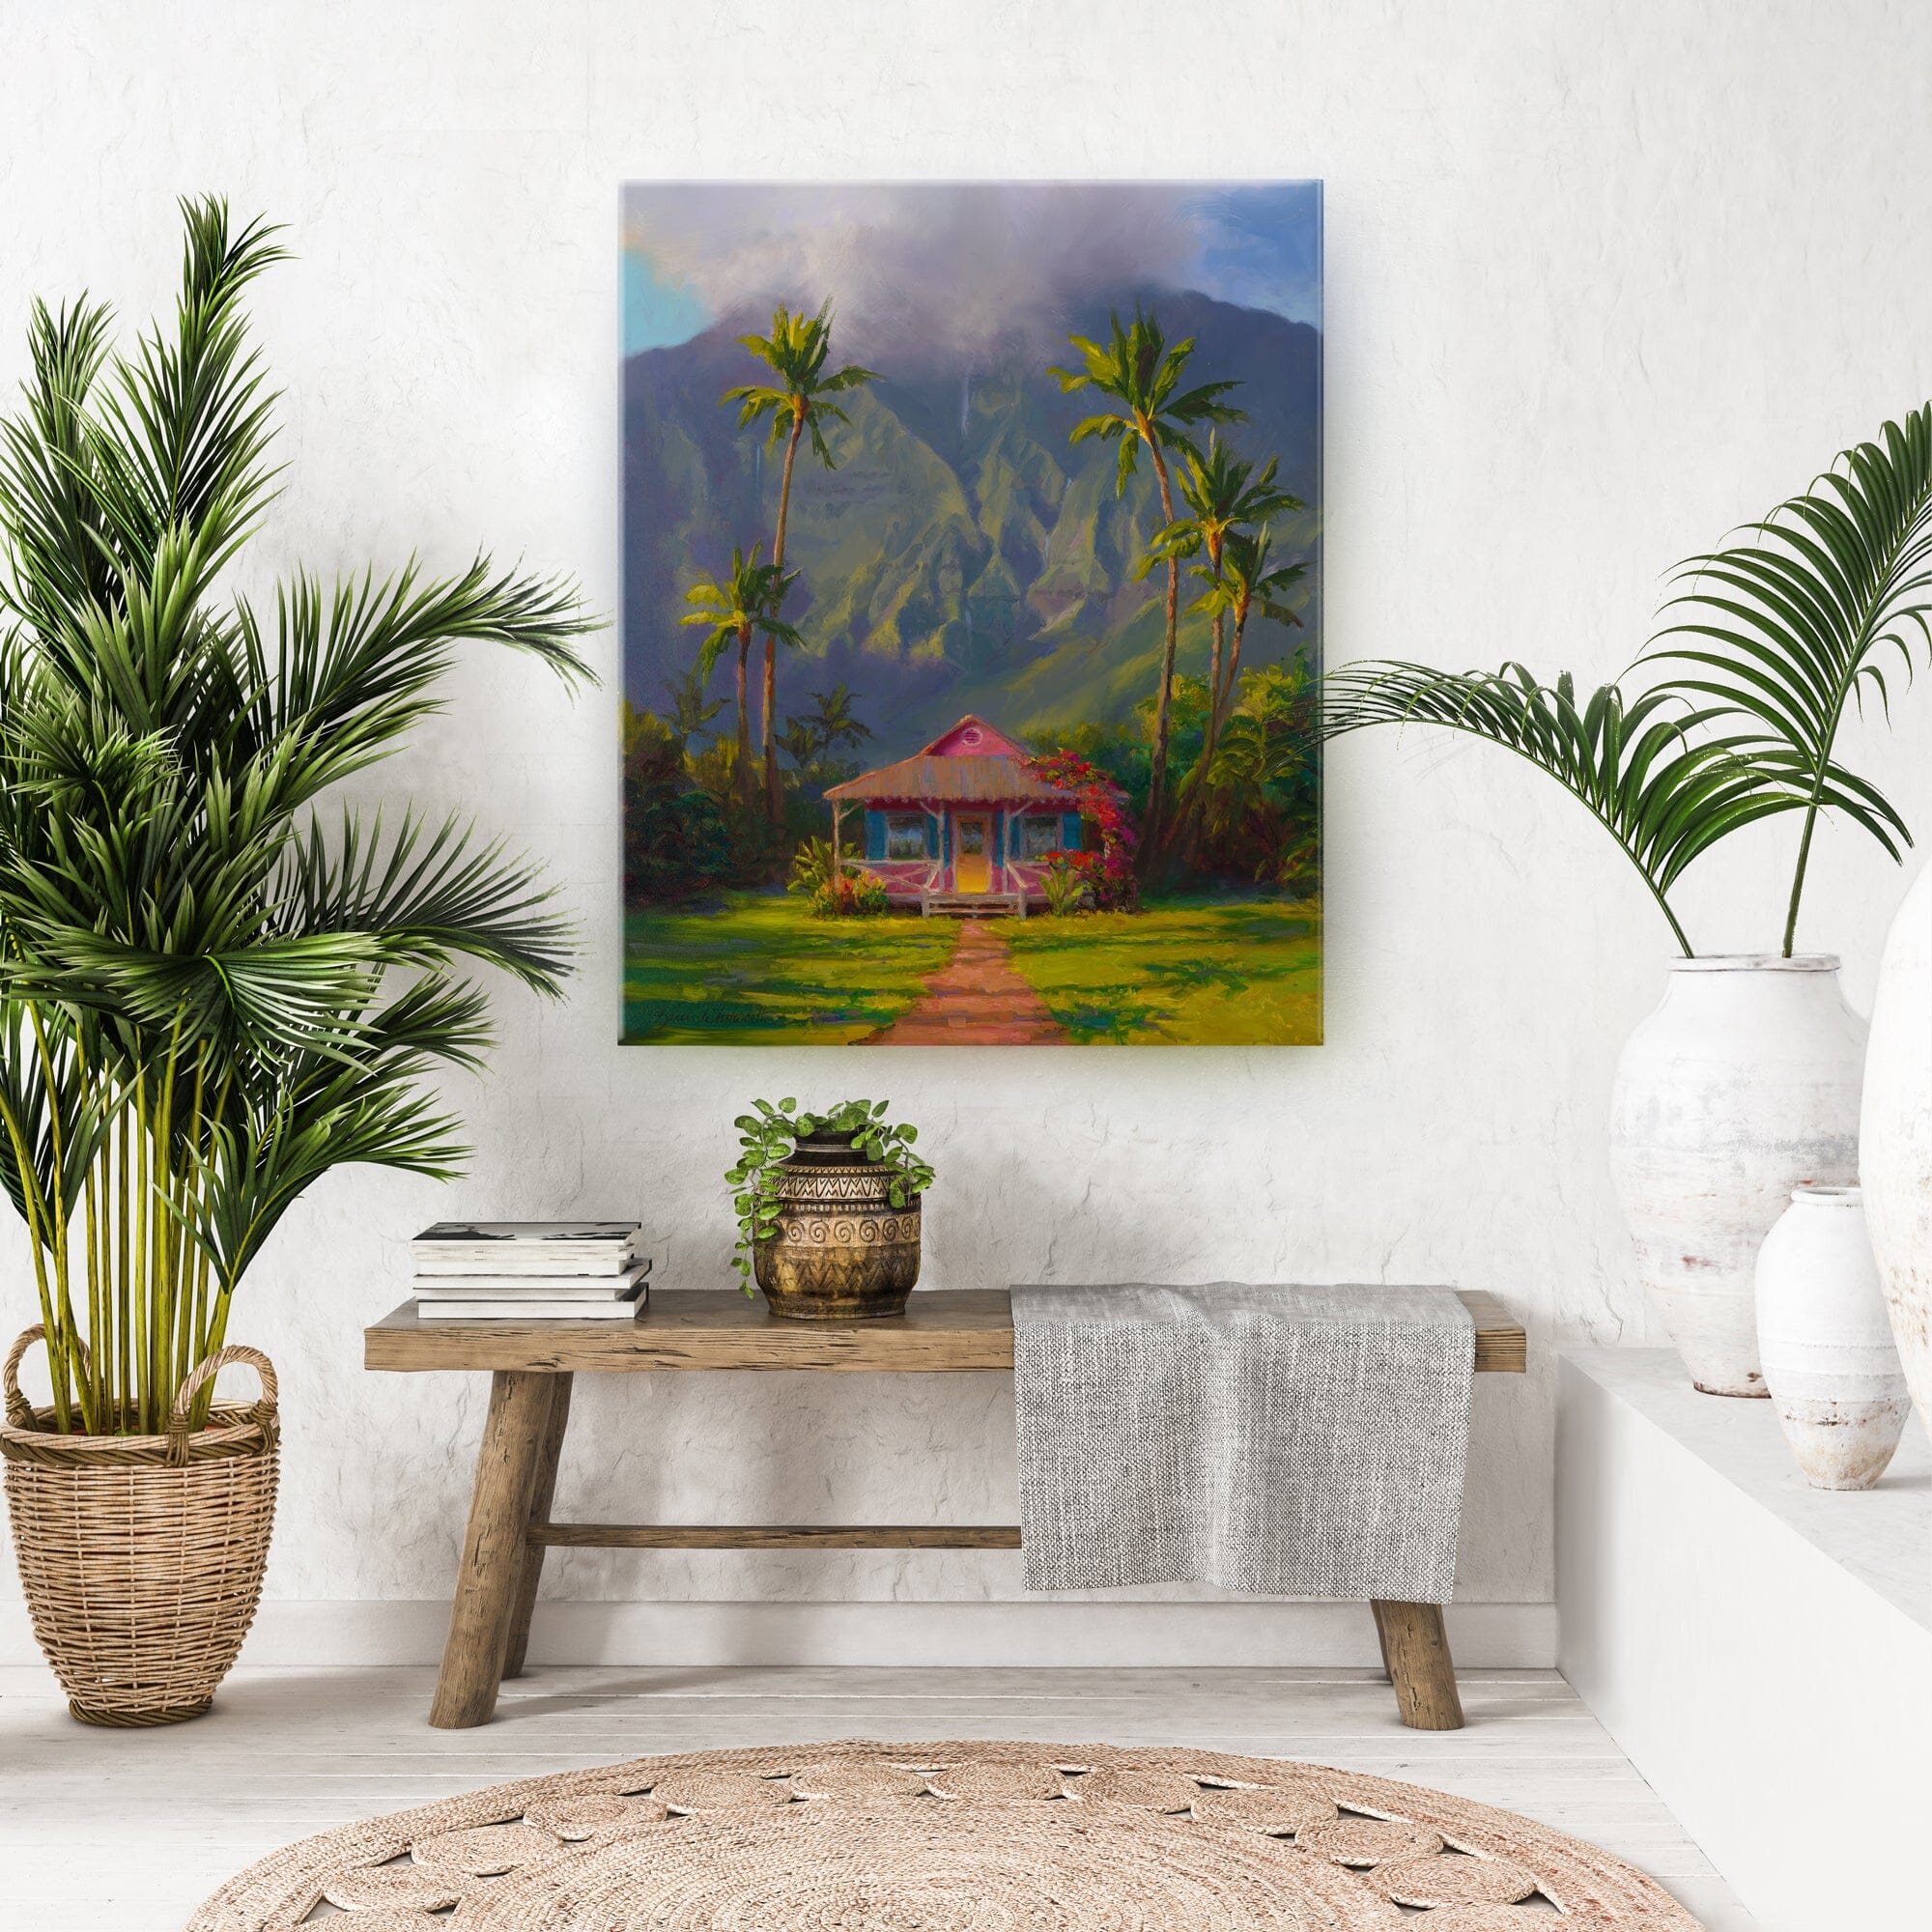 Hawaii landscape painting of a Hawaiian cottage beneath a tropical mountain and palm trees in Hanalei, Kauai. The painting is an original  artwork by artist Karen Whitworth and is depicted as a wall art hanging on a white wall.